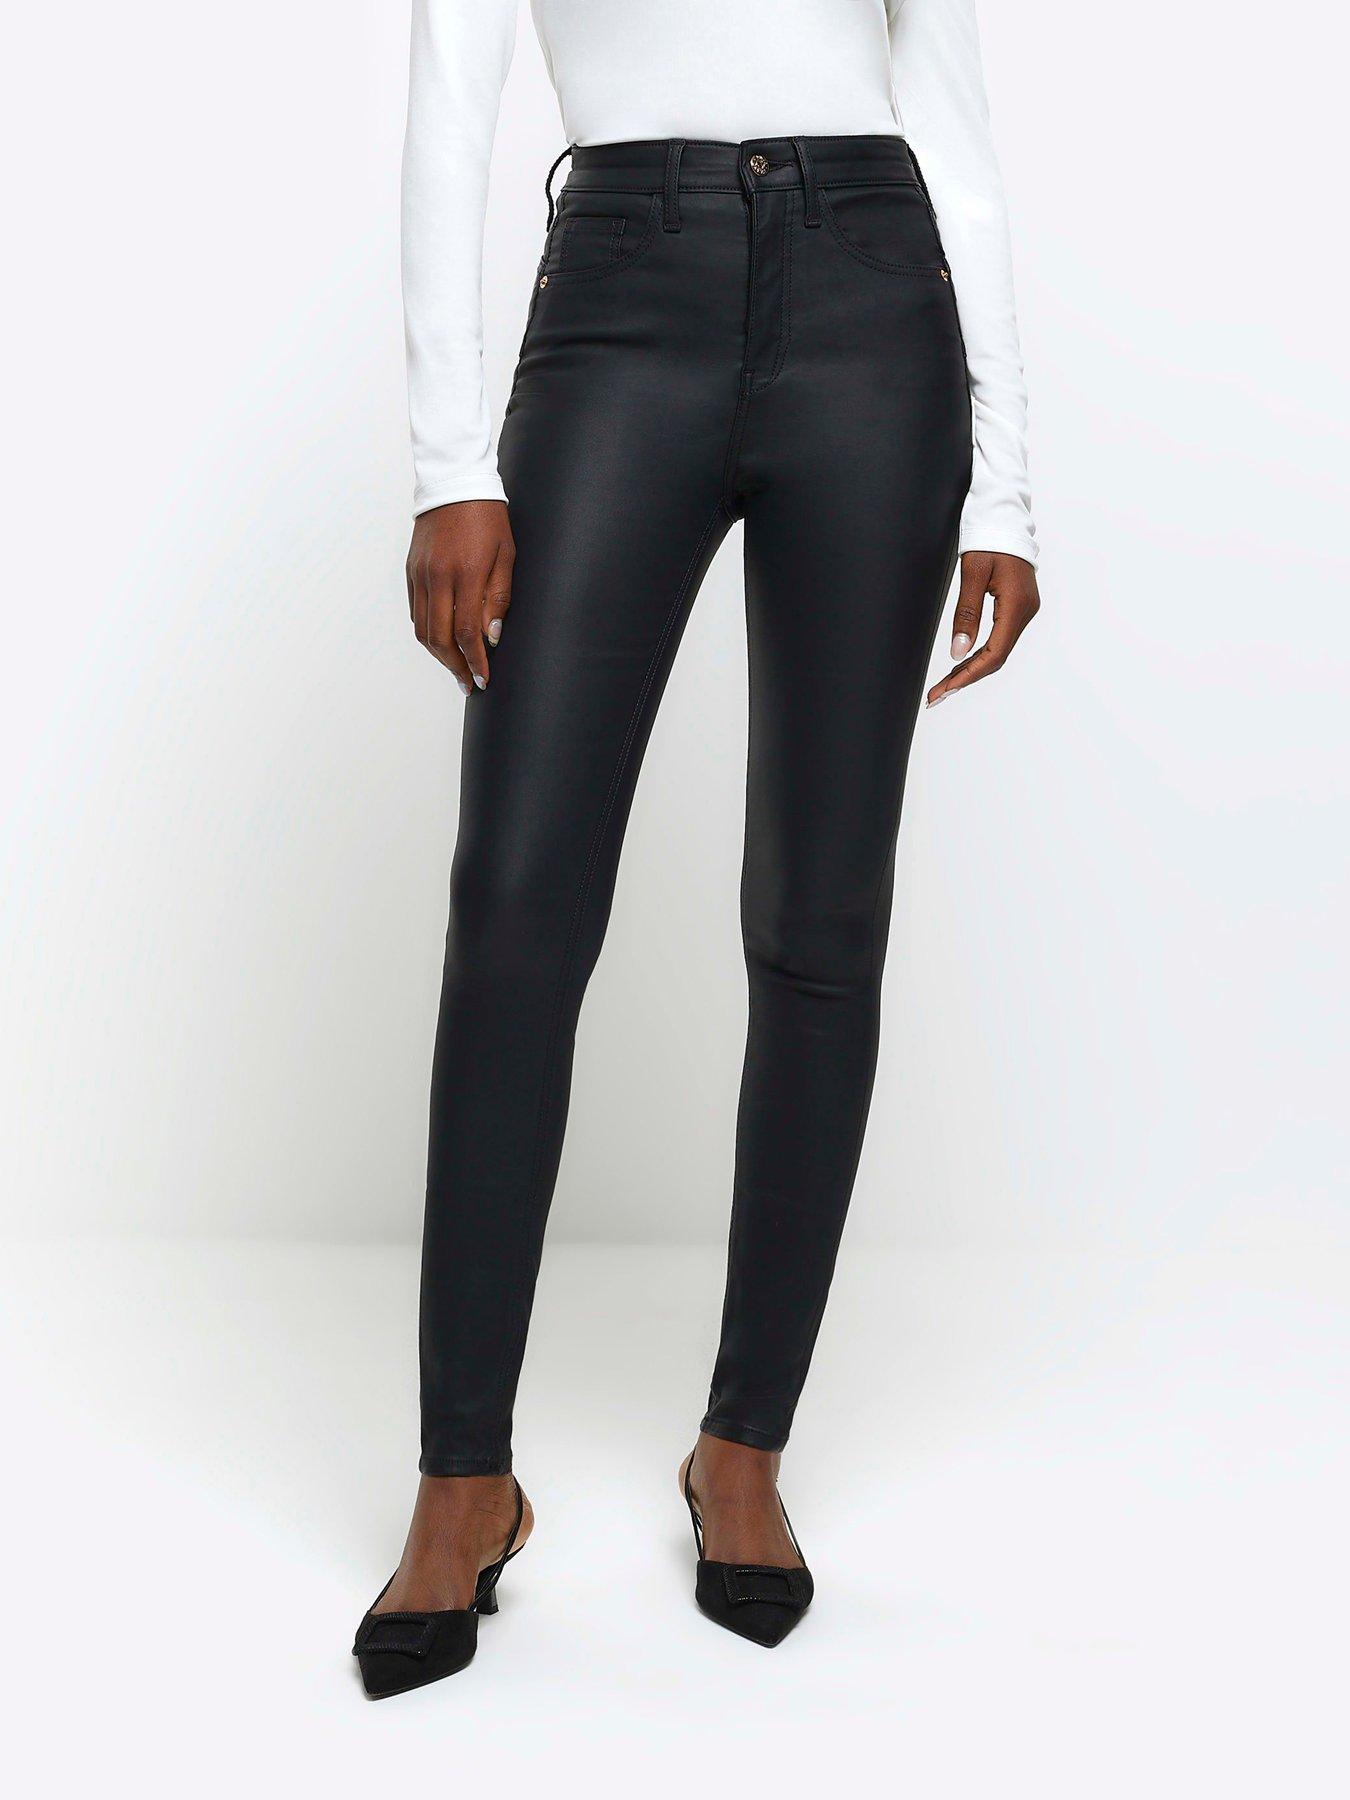 Live In 3 Button Coated Skinny Jeans in Black